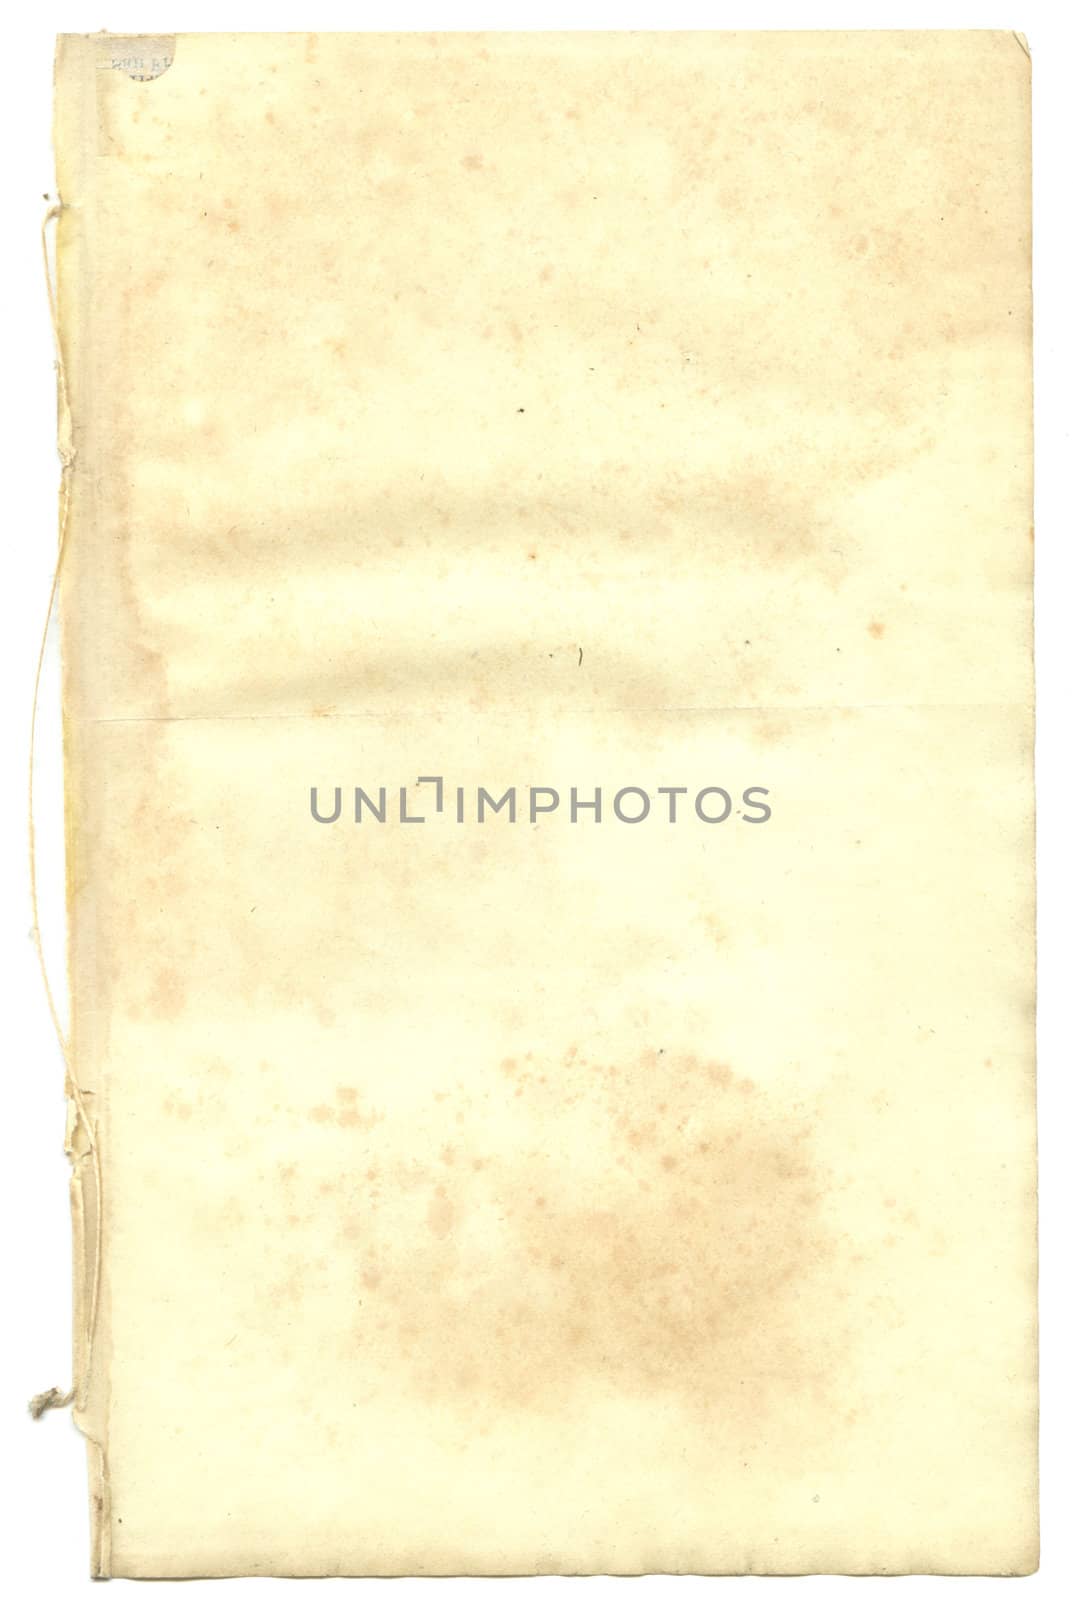 Vintage old paper great for backgrounds. High quality.